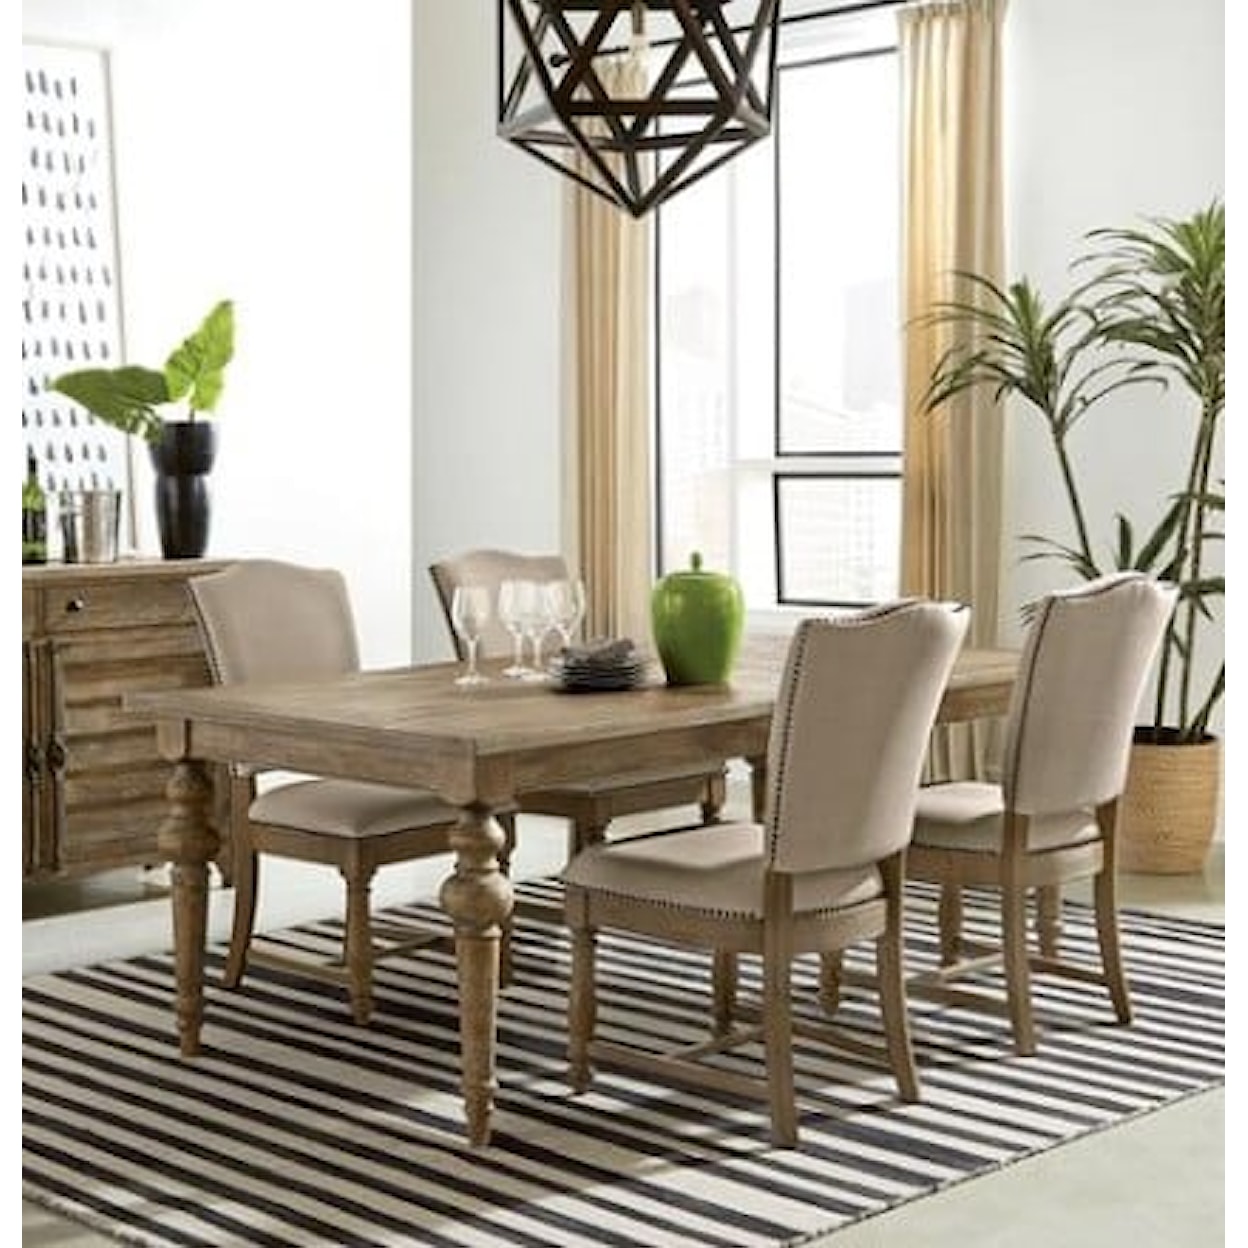 Riverside Furniture Sonora 5-piece Dining Room Group